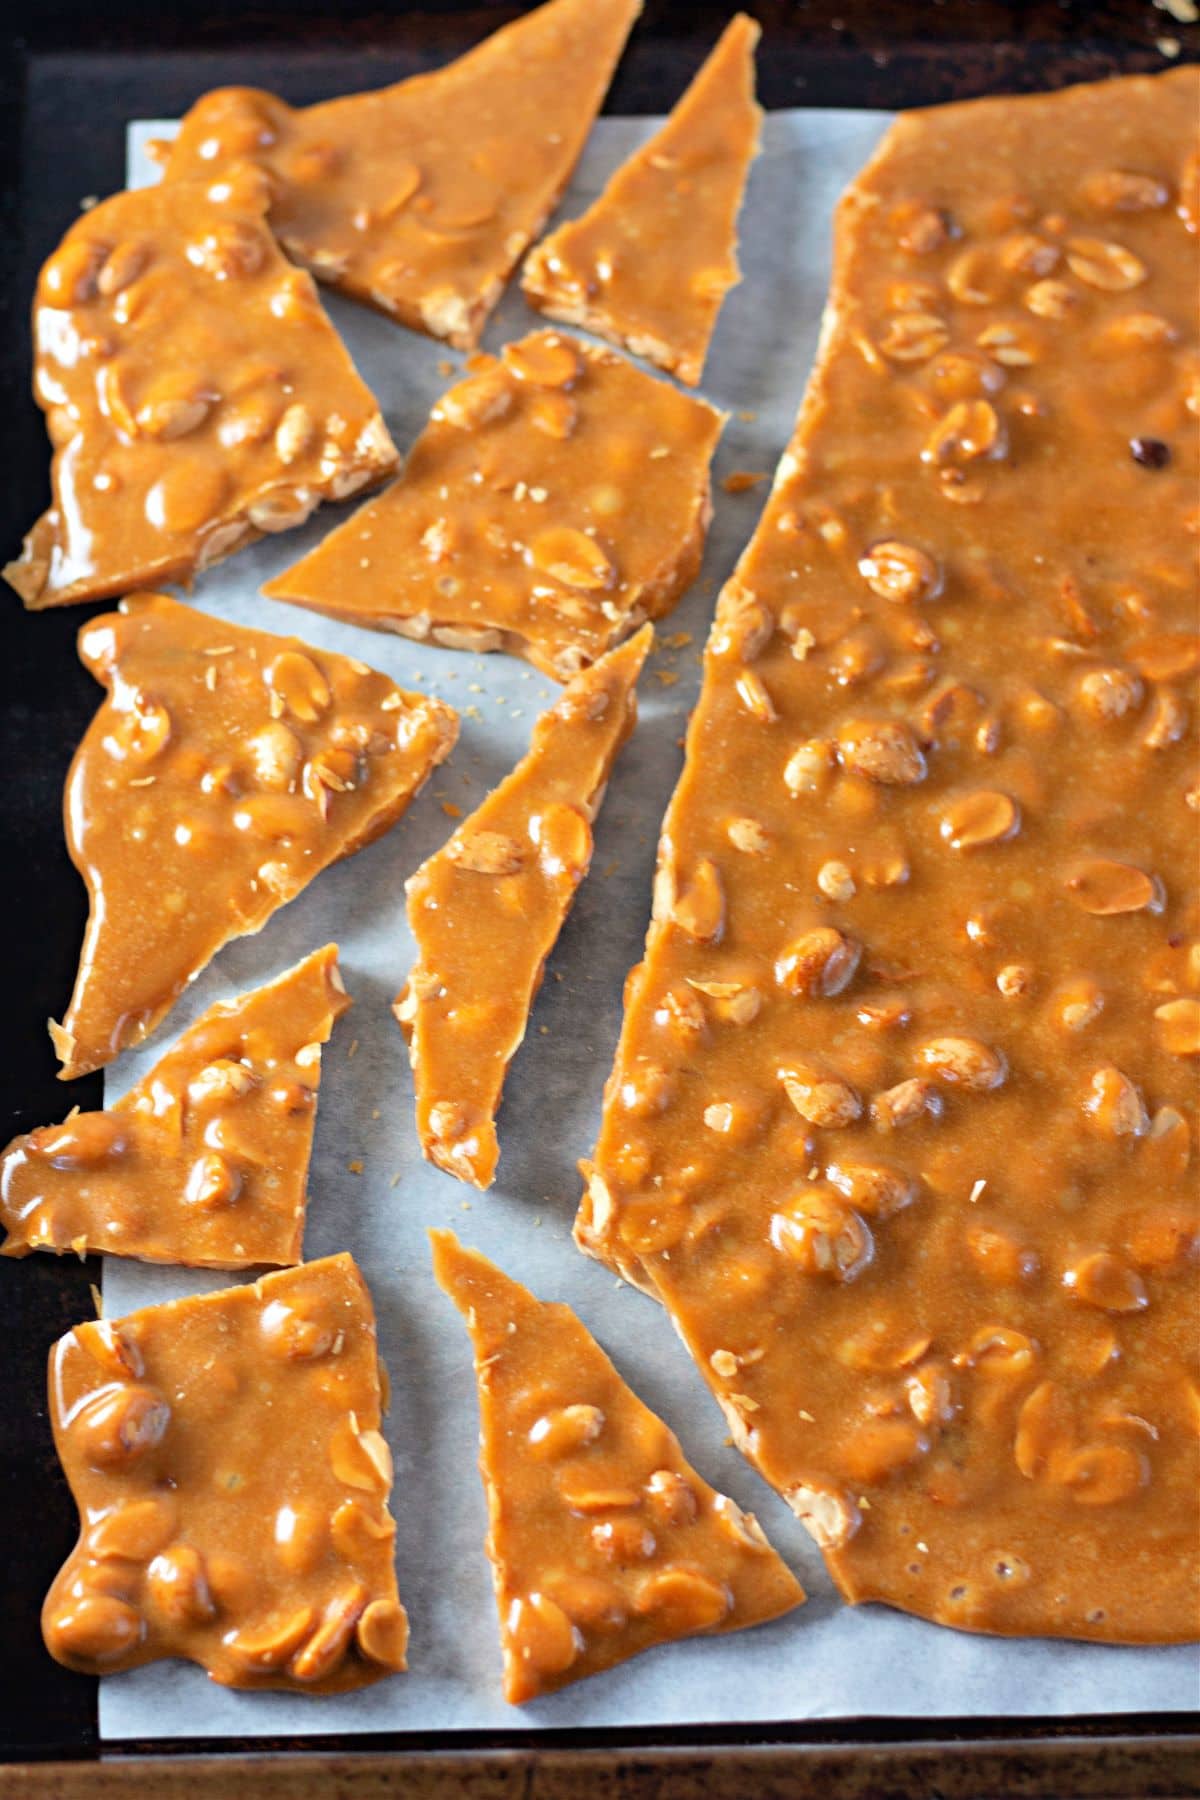 breaking up the freshly made Homemade Peanut Brittle Recipe.